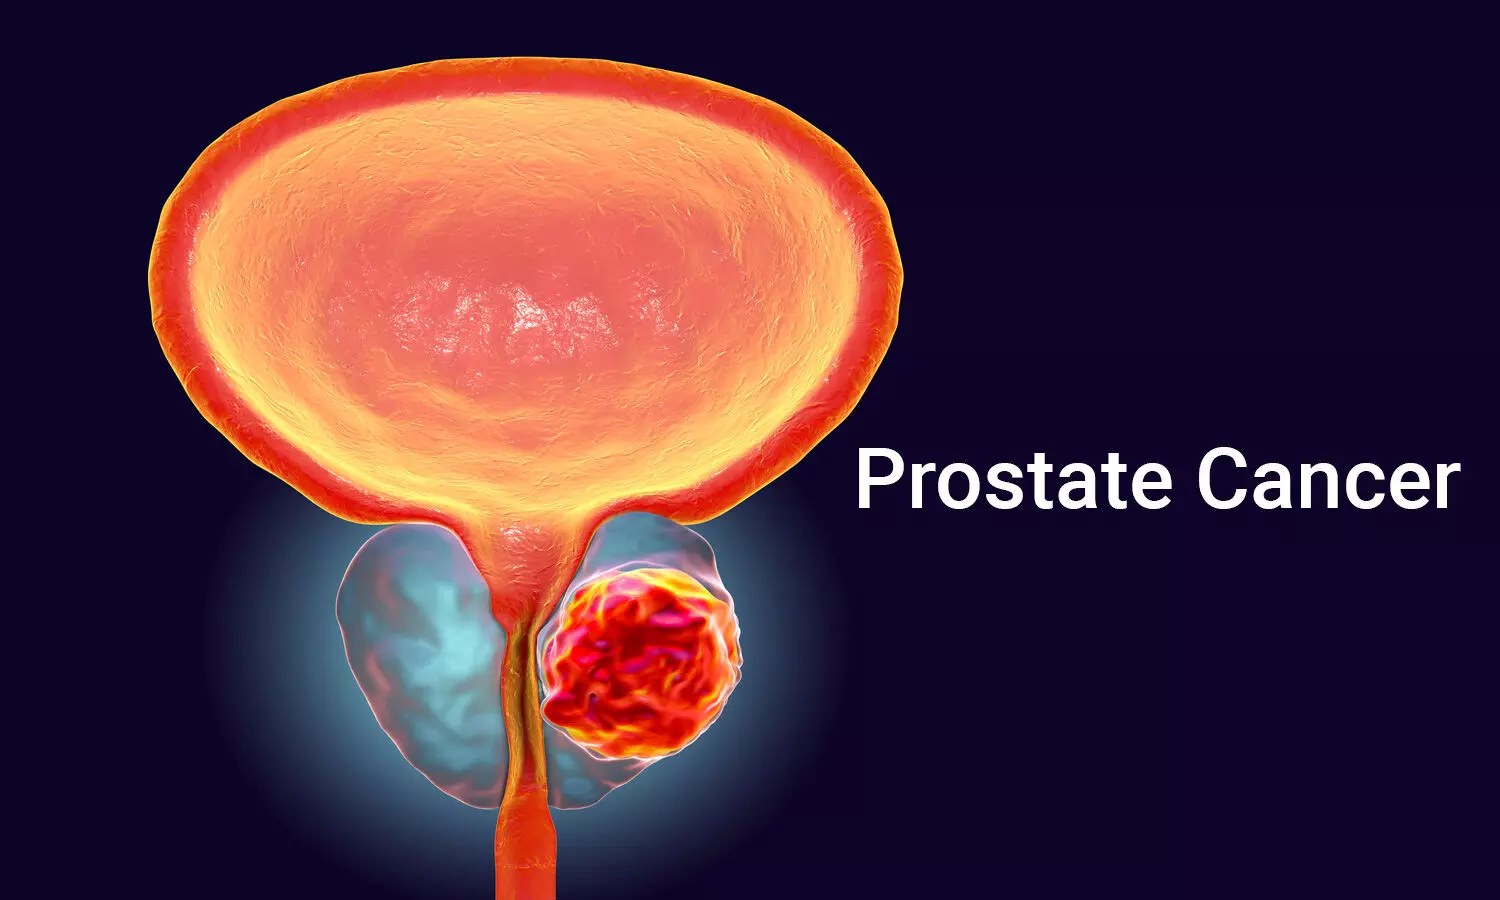 Combination of MRI and new blood test may improve prostate cancer detection: Lancet